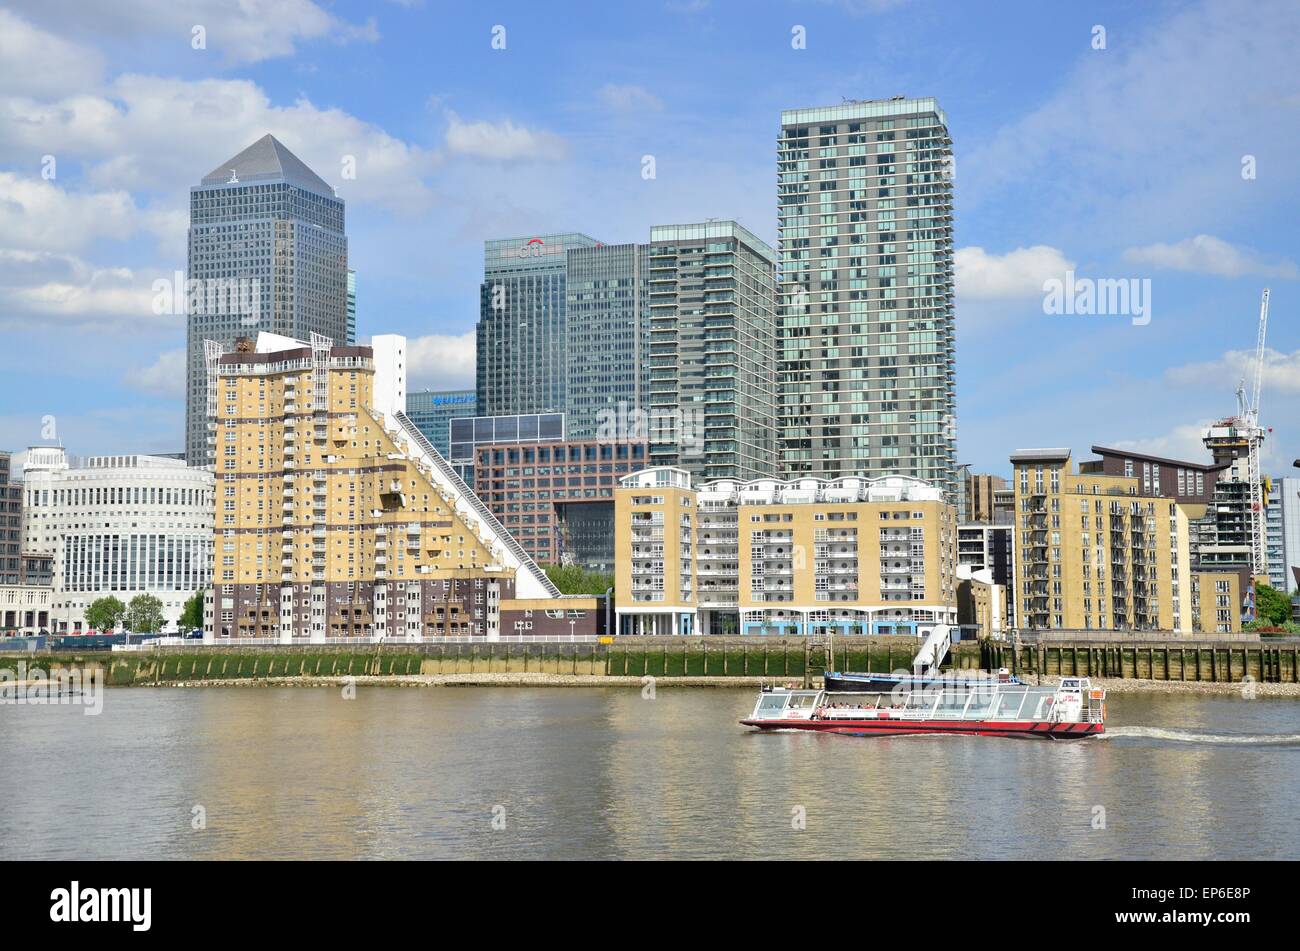 View of Canary Wharf from Rotherhithe, London, England, UK, SE16 Stock Photo